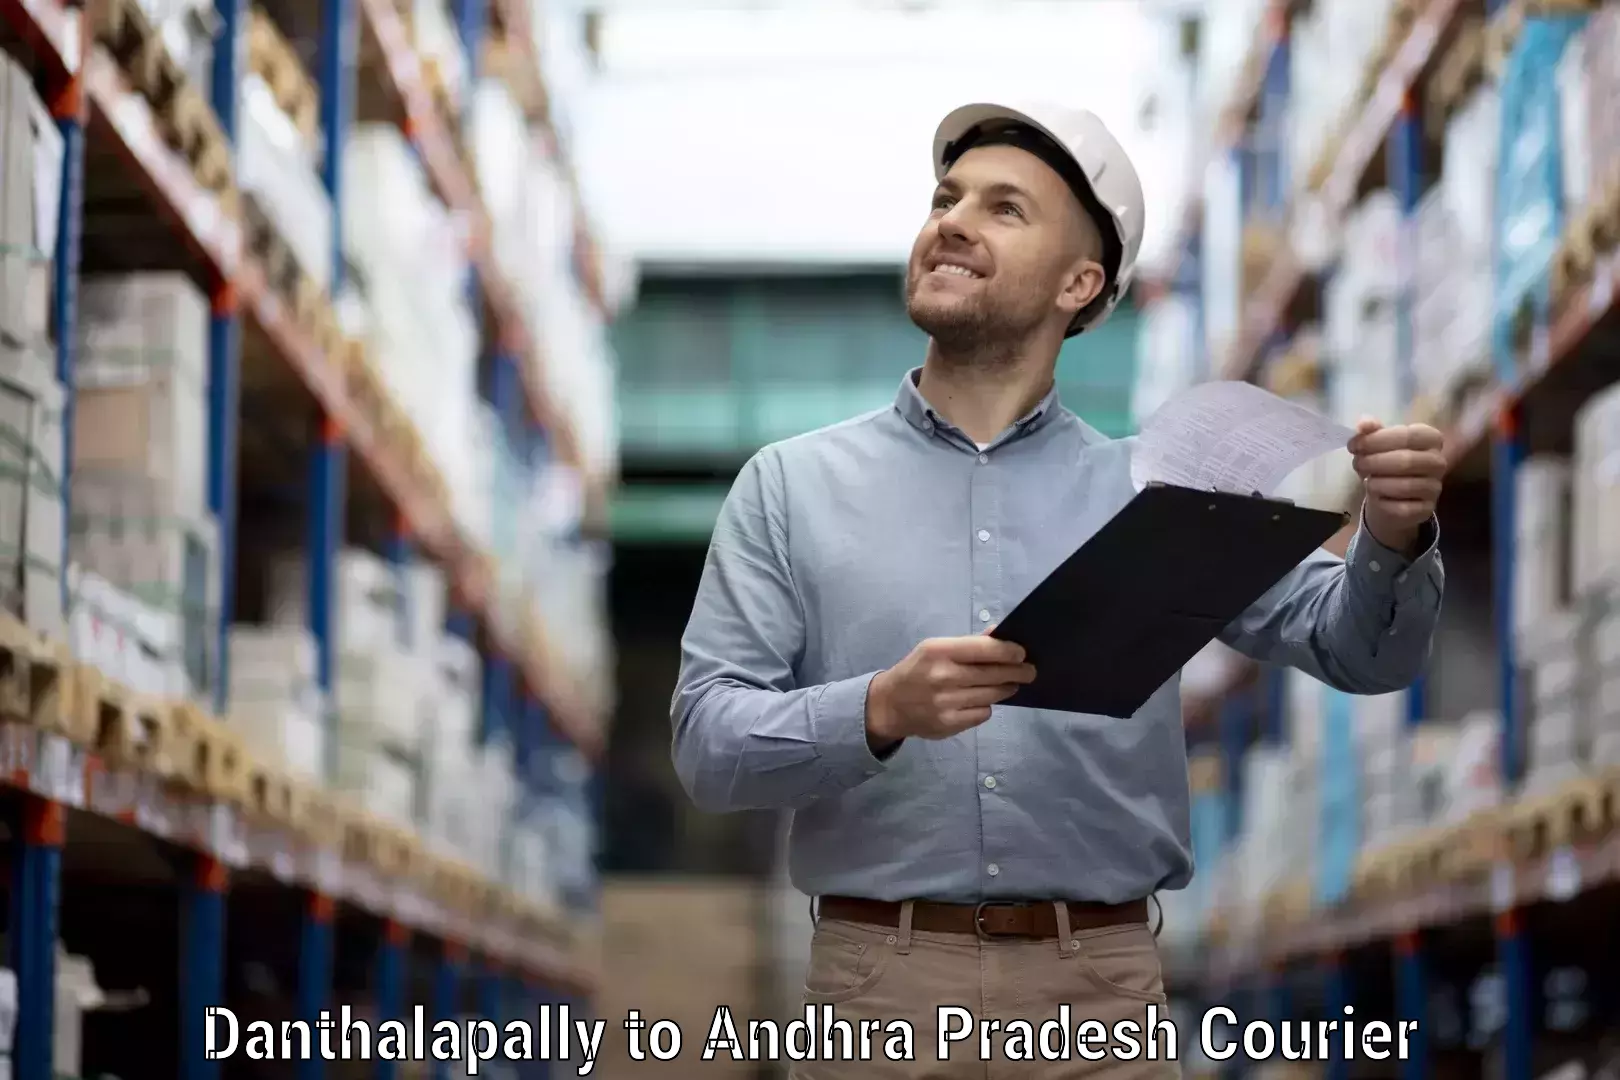 Professional courier handling Danthalapally to Visakhapatnam Port